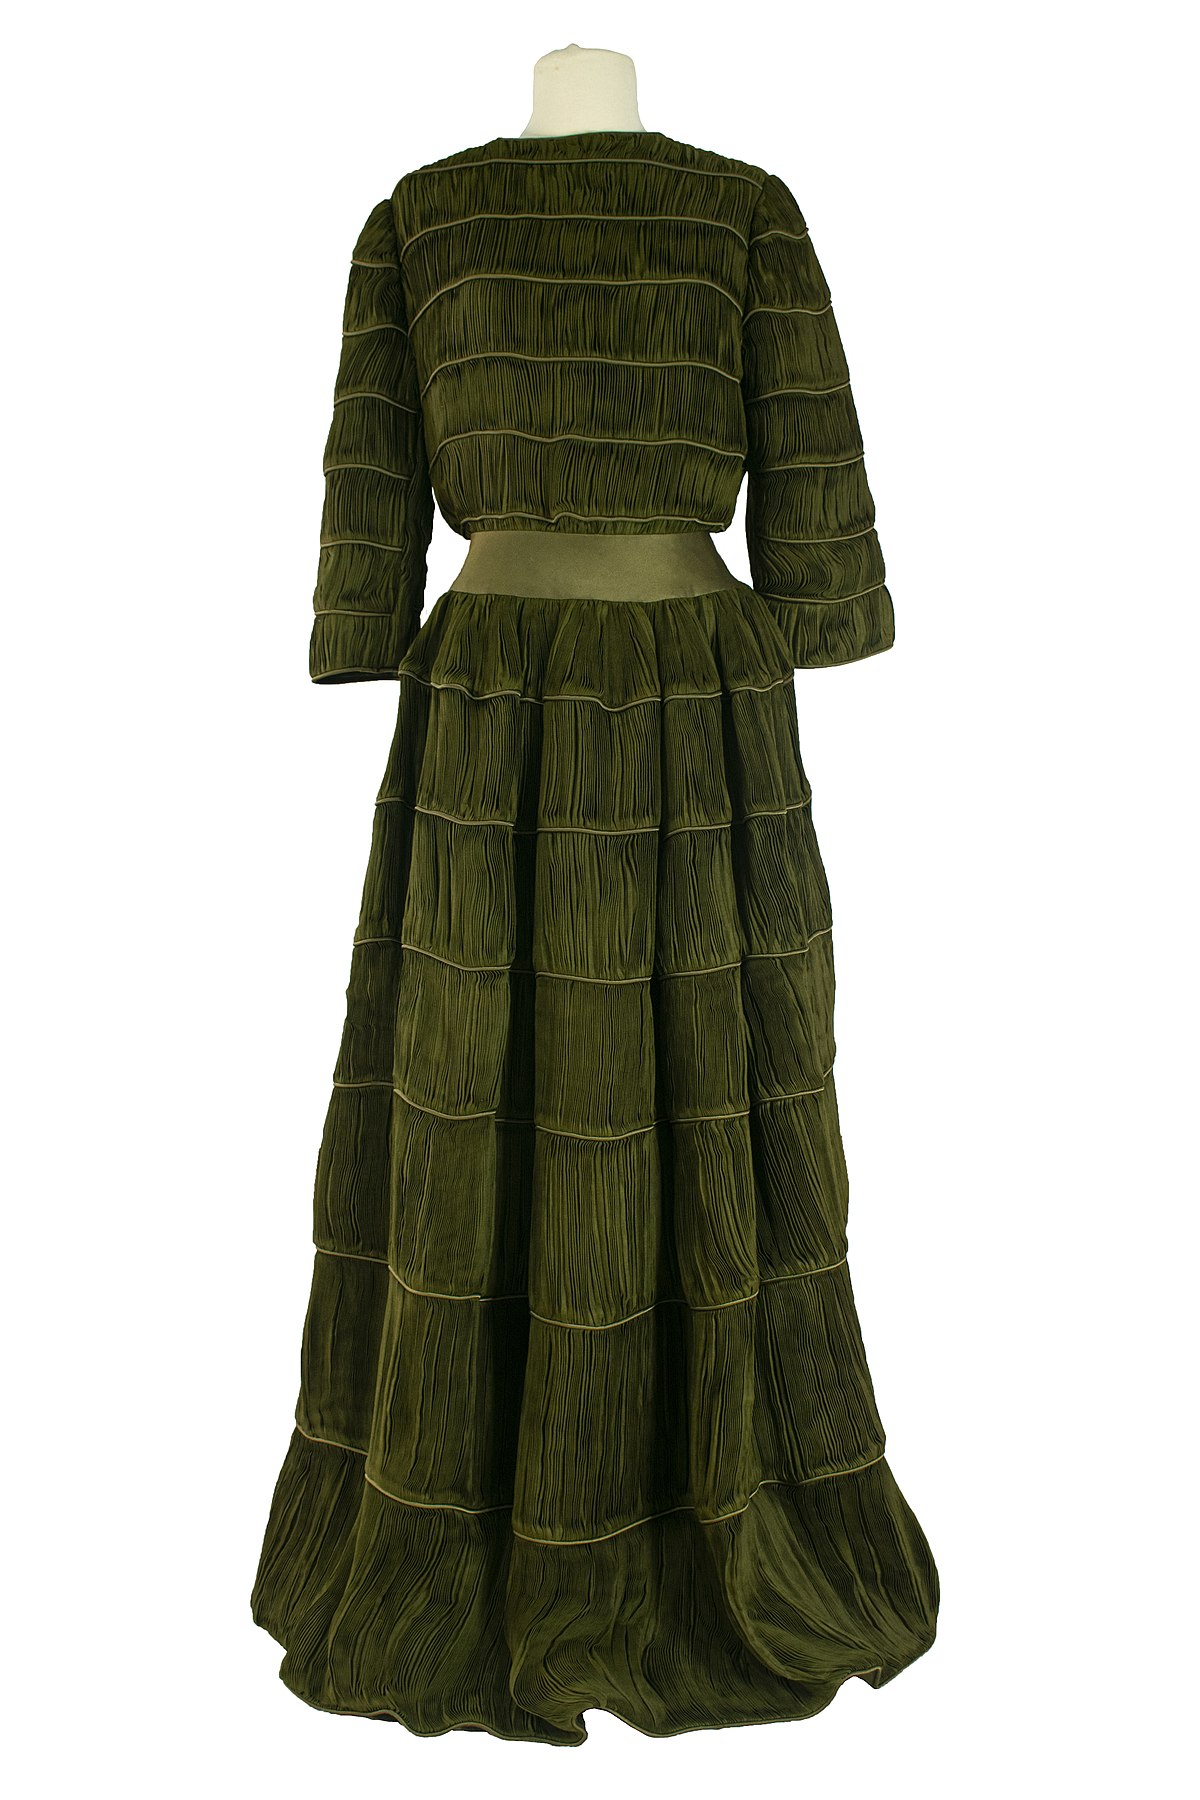 https://upload.wikimedia.org/wikipedia/commons/thumb/2/29/Green_Pleated_Linen_Dress%2C_%27Irish_Moss%27_by_Sybil_Connolly_-_Full_Length_Front.jpg/1200px-Green_Pleated_Linen_Dress%2C_%27Irish_Moss%27_by_Sybil_Connolly_-_Full_Length_Front.jpg